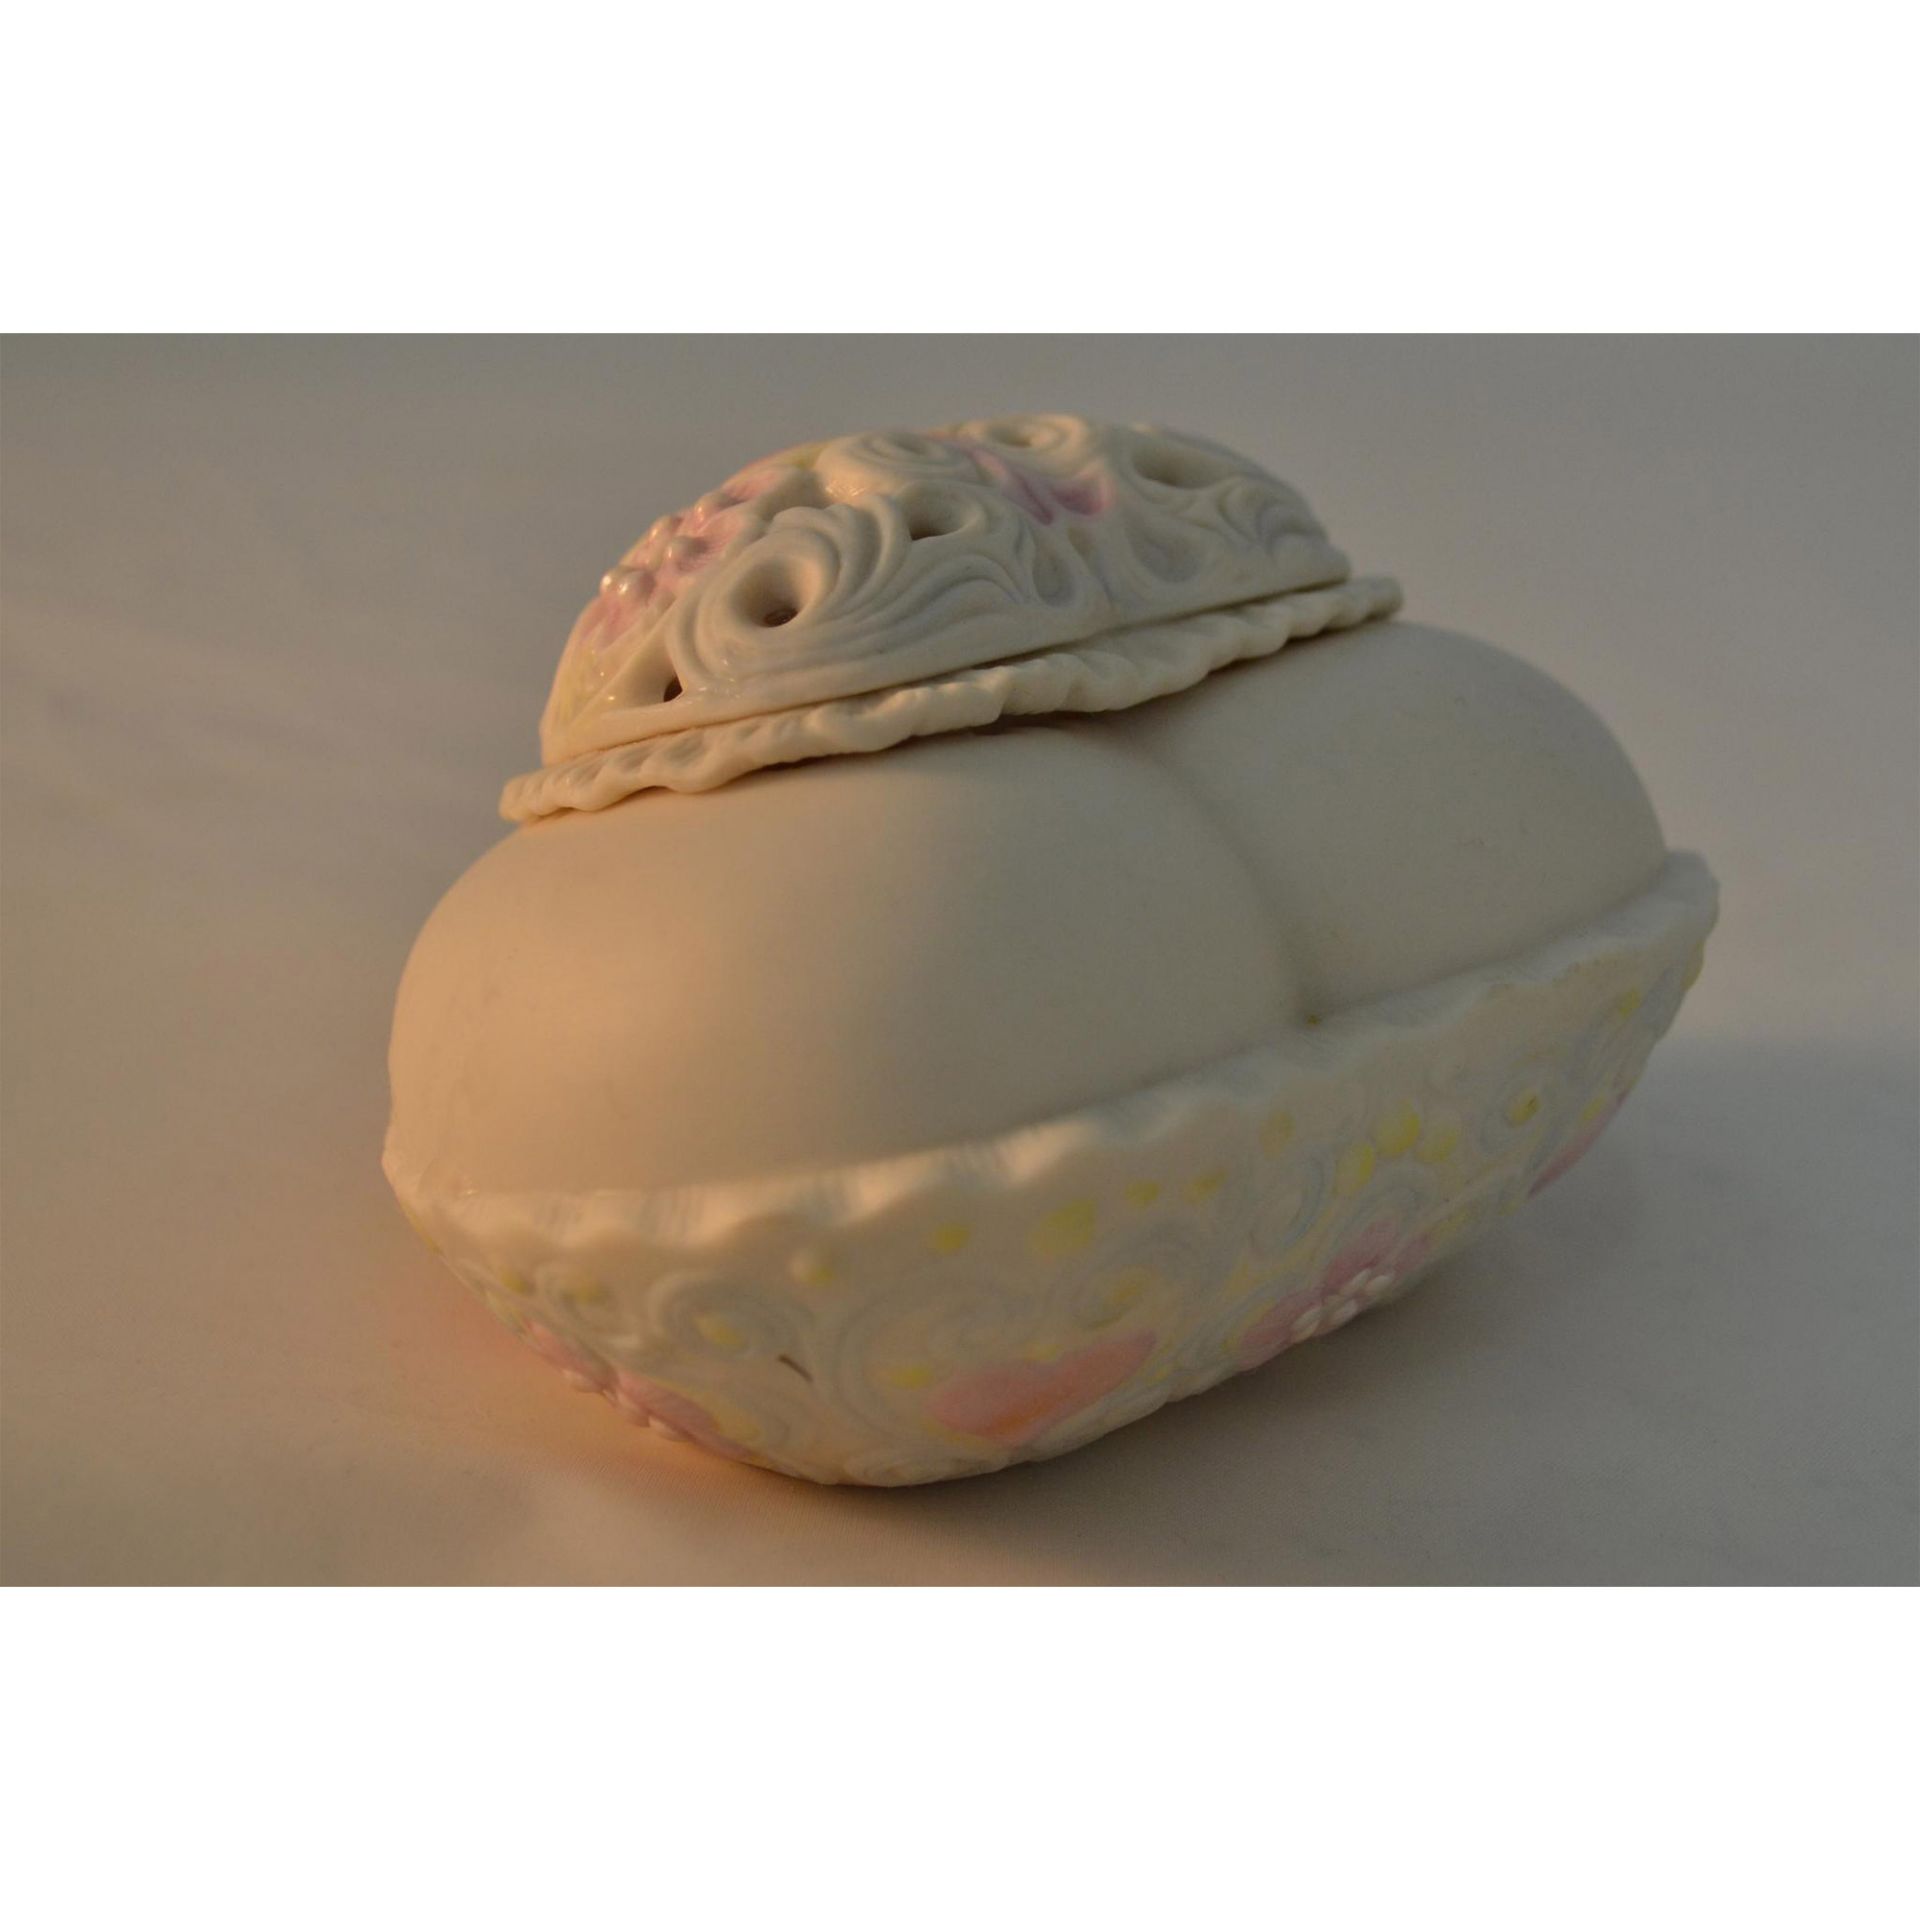 Cybis Porcelain Pastel Lidded Heart Box, Thinking Of You - Image 4 of 6